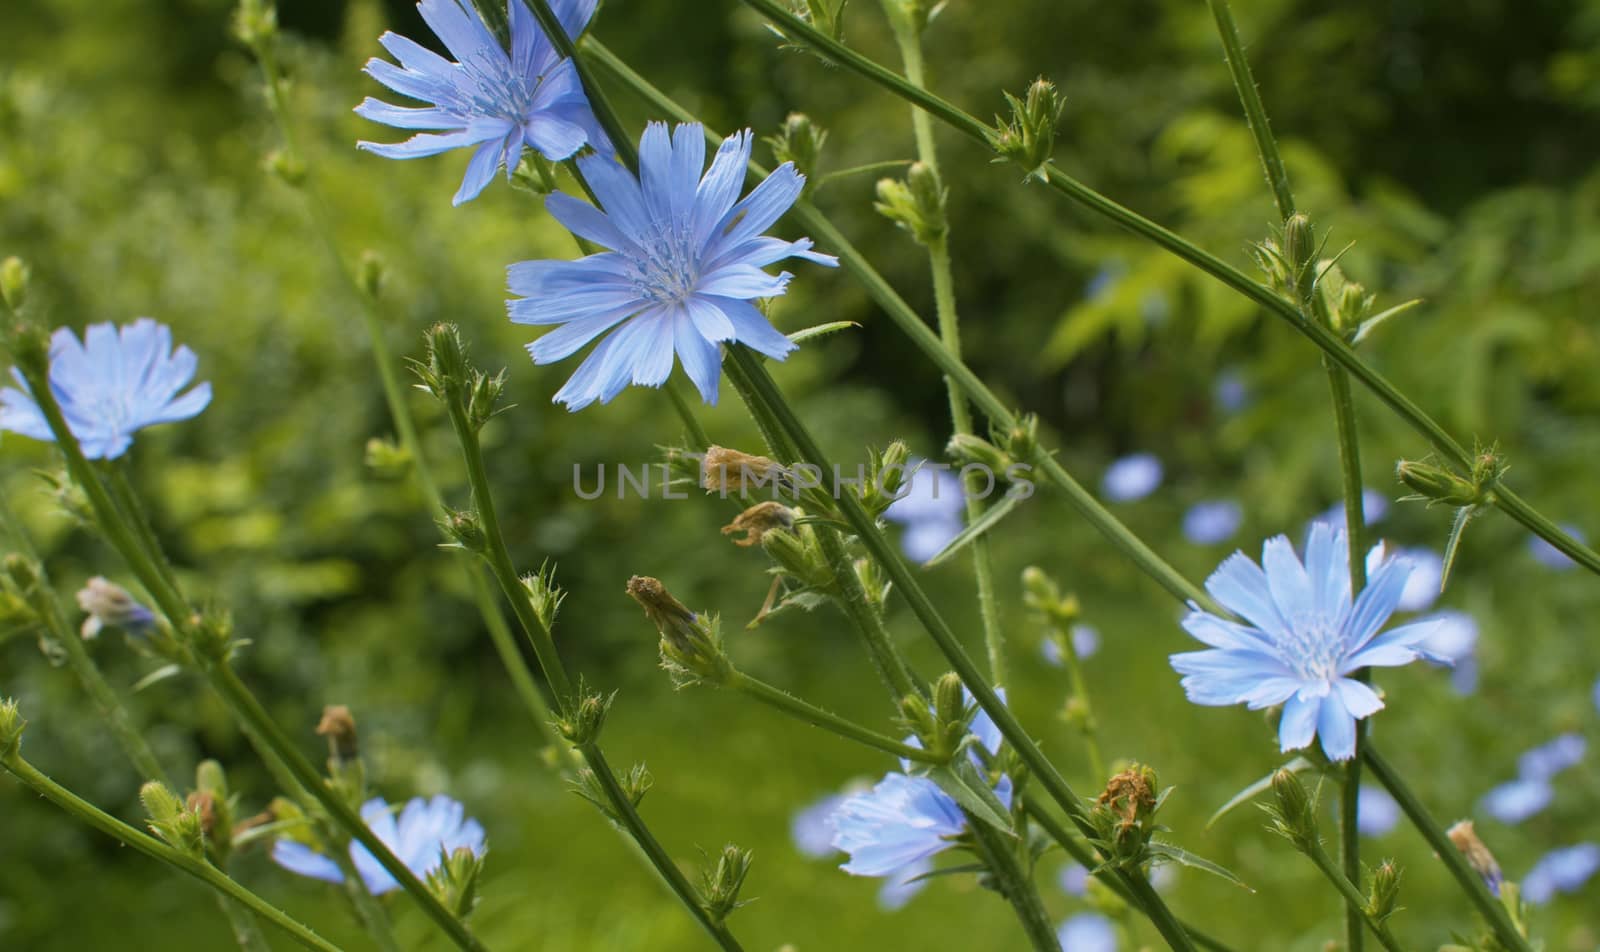 Close up view of blue chicory flower on the grass in the park. Macro shooting, camera slowly moving along the flowers. Seasonal scene. Natural background